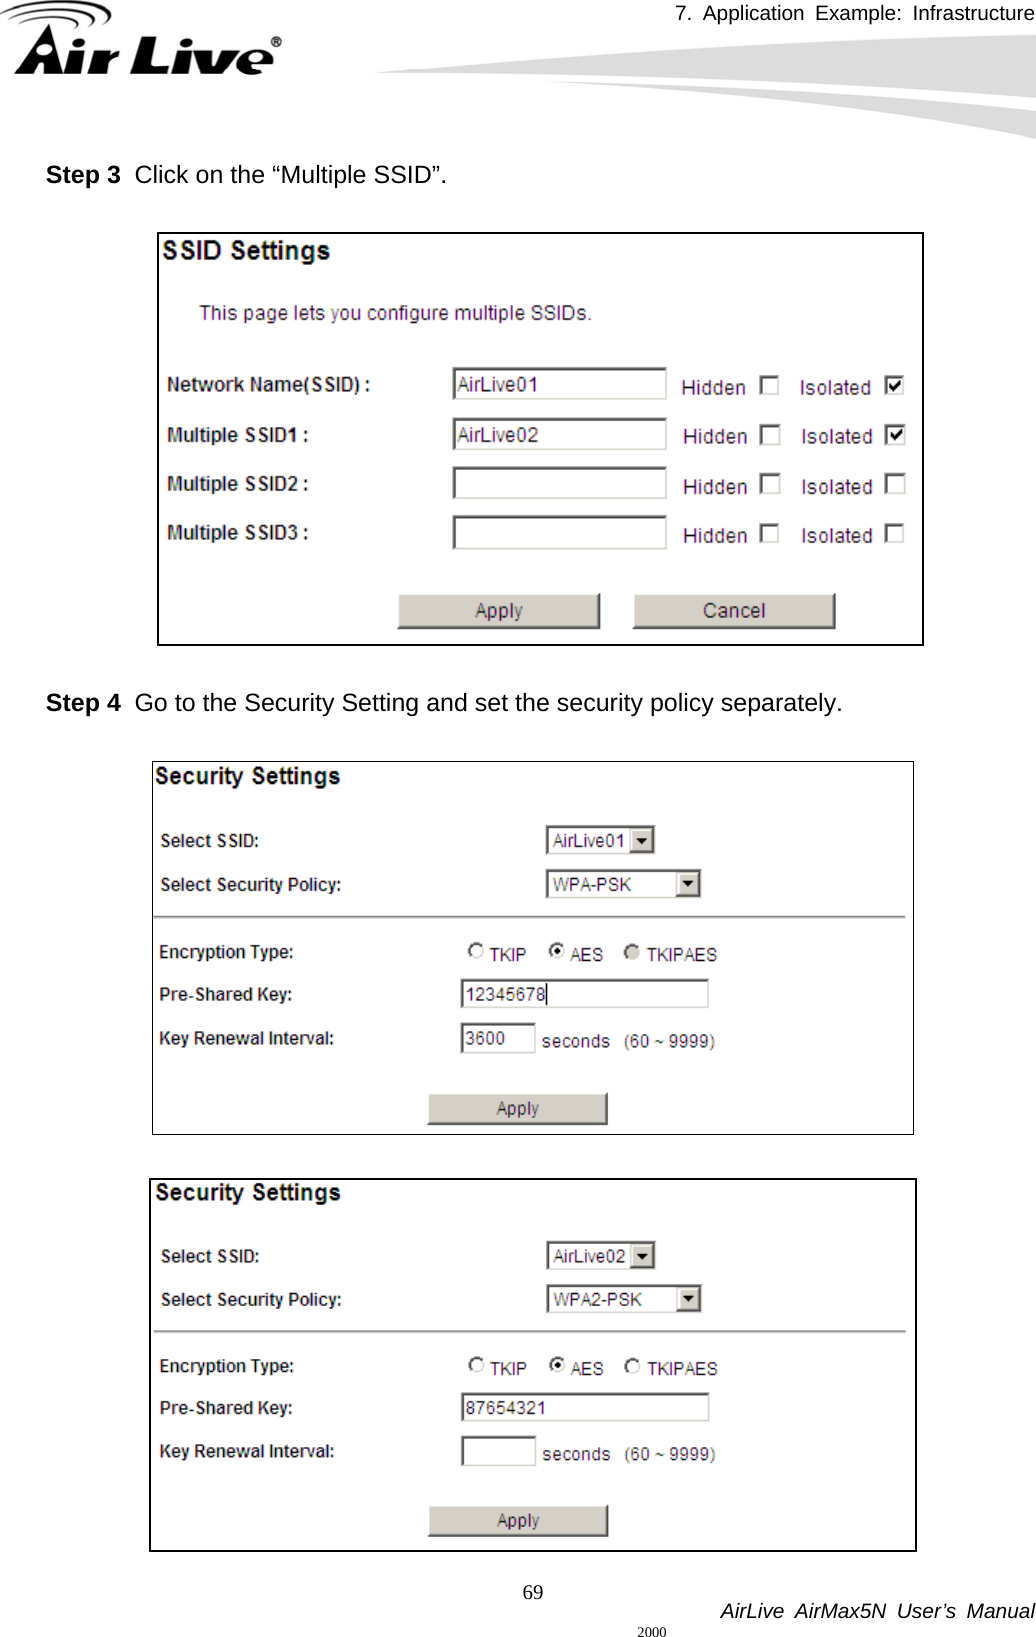 7. Application Example: Infrastructure           AirLive AirMax5N User’s Manual 69Step 3  Click on the “Multiple SSID”.    Step 4  Go to the Security Setting and set the security policy separately.     2000 